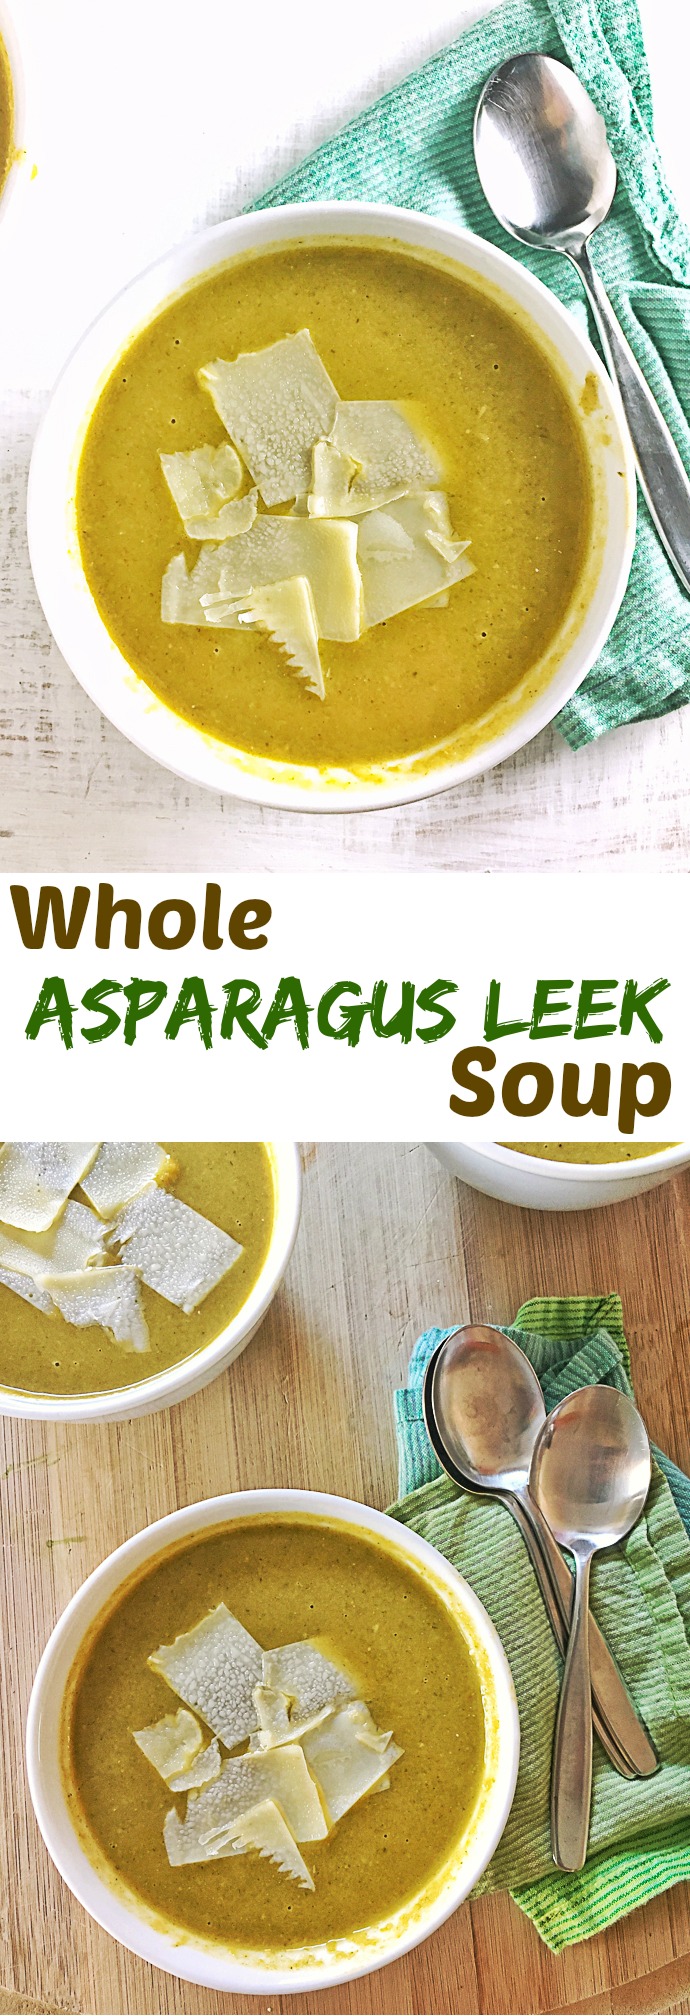 No waste here: use the entire asparagus spear and leek in this Whole Asparagus Leek Soup. Recipe at Teaspoonofspice.com